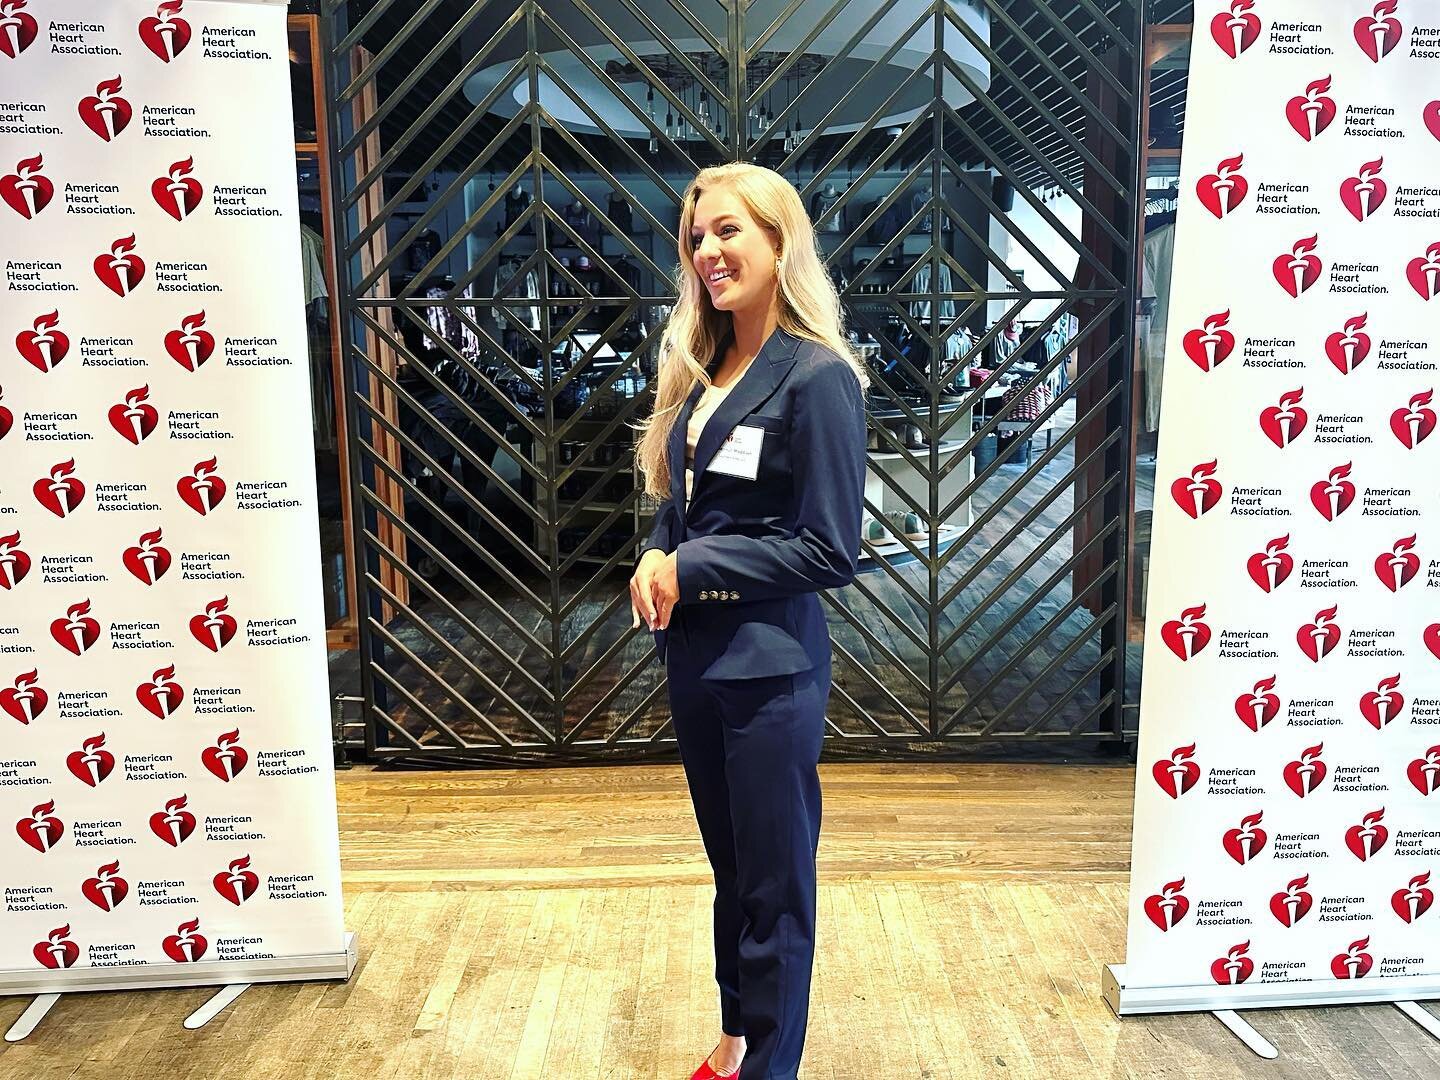 @savannahmaddison was a special guest at the 2023 Executive Breakfast with American Heart Association! An incredible morning focused on the next 100 years of Heart Health and Stroke Treatment!